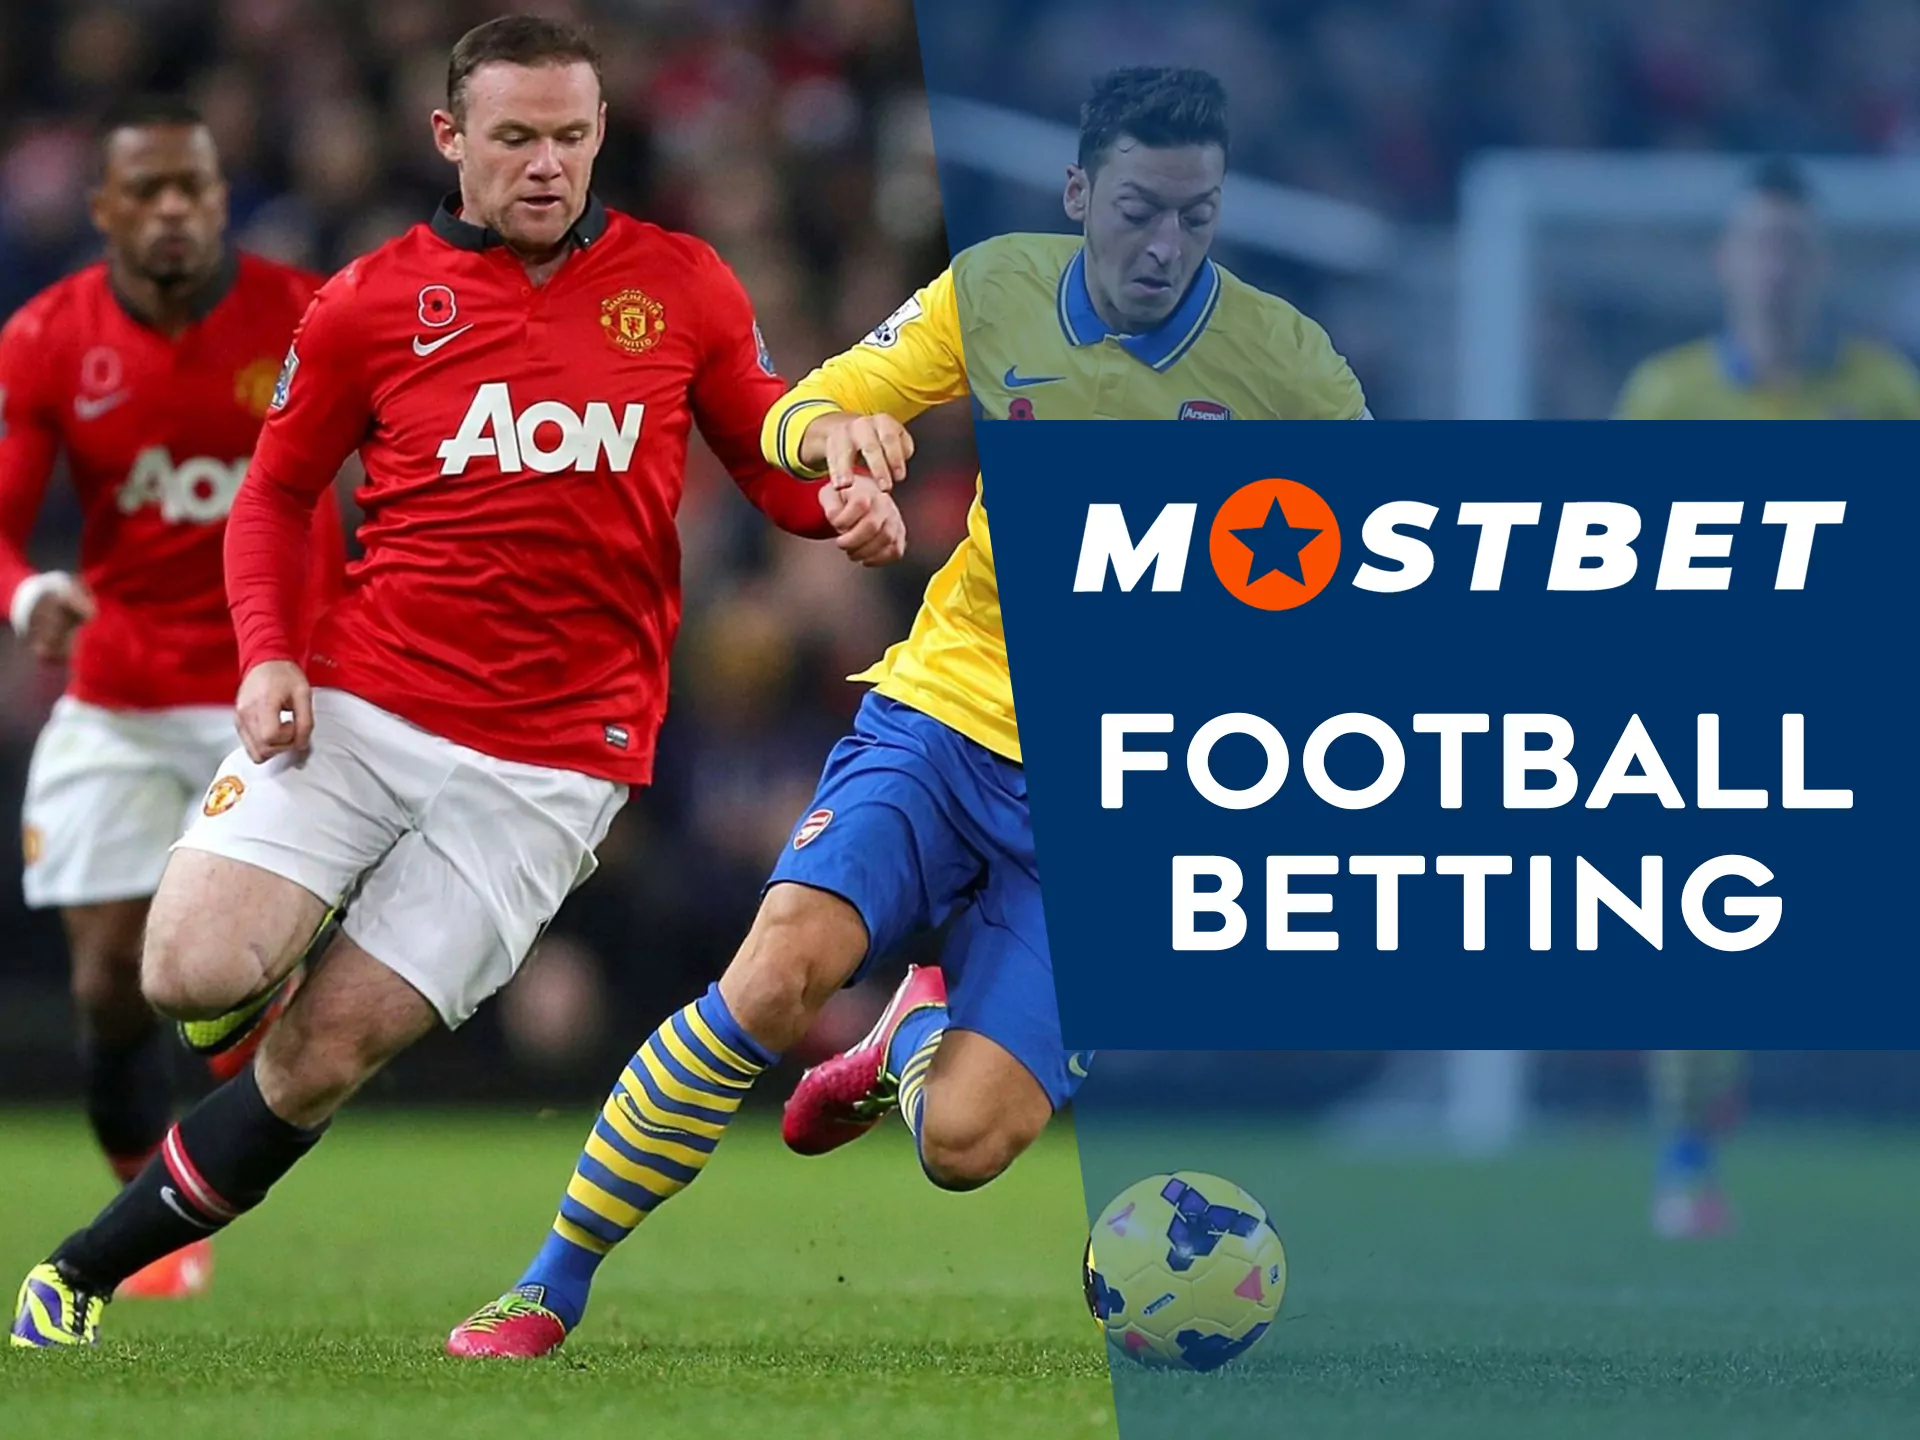 Mostbet betting at Mostbet.